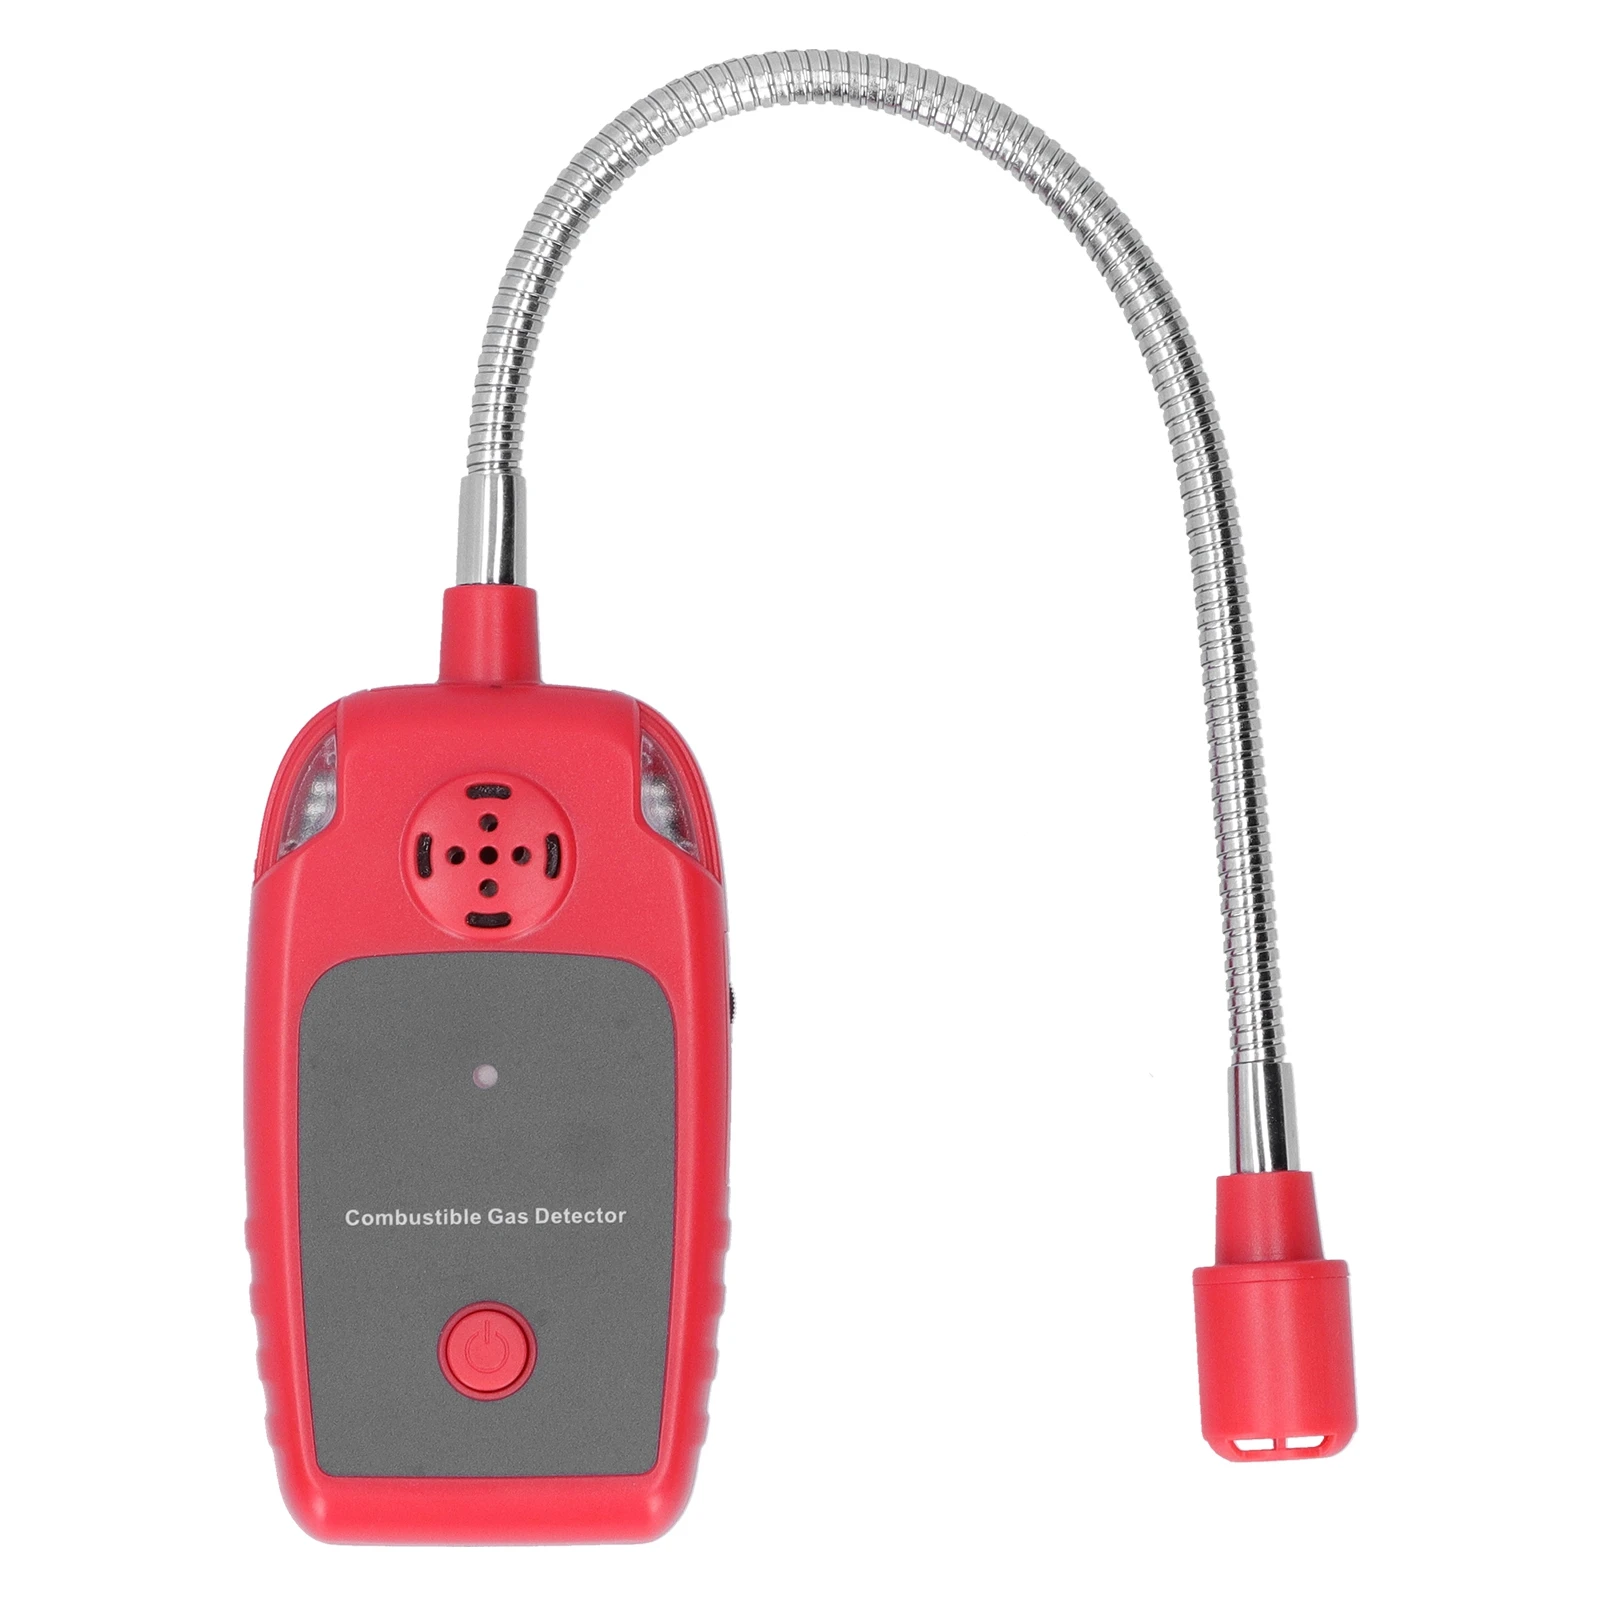 

WT8820 Portable Combustible Flammable Gas Detector Natural Gas Methane Leakage Alarm Gas Analyzing Tools